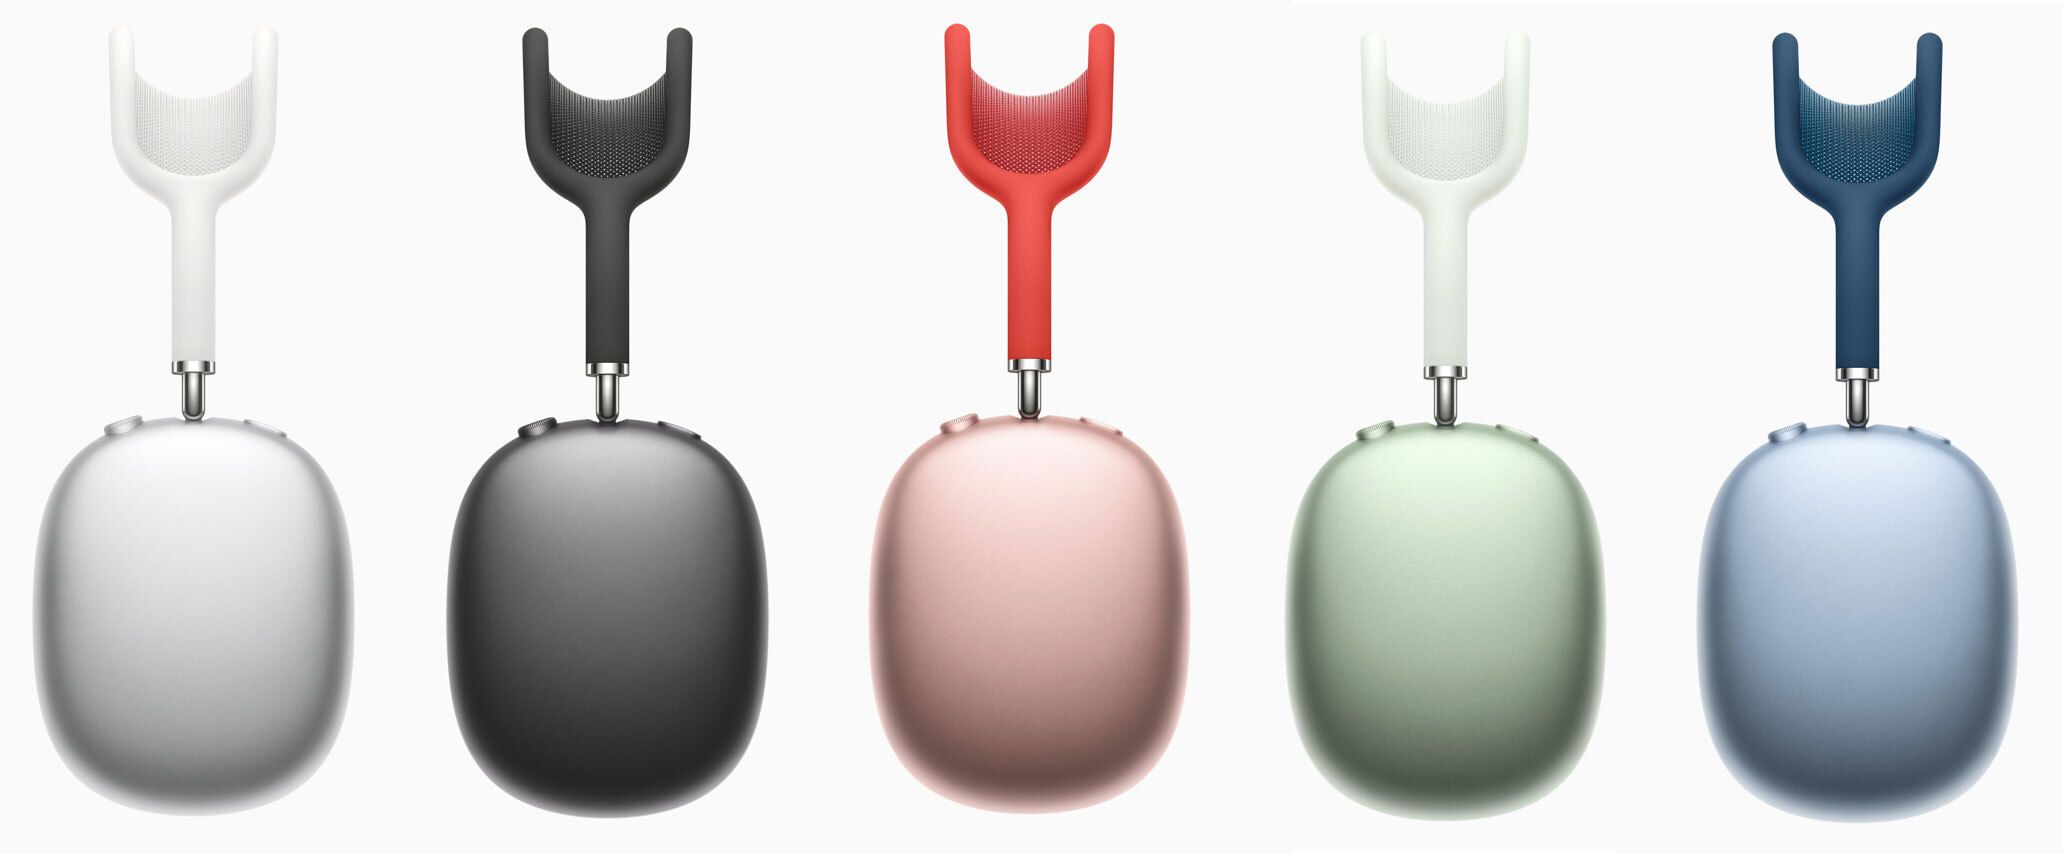 The Many Colors of AirPods Max, apple.com